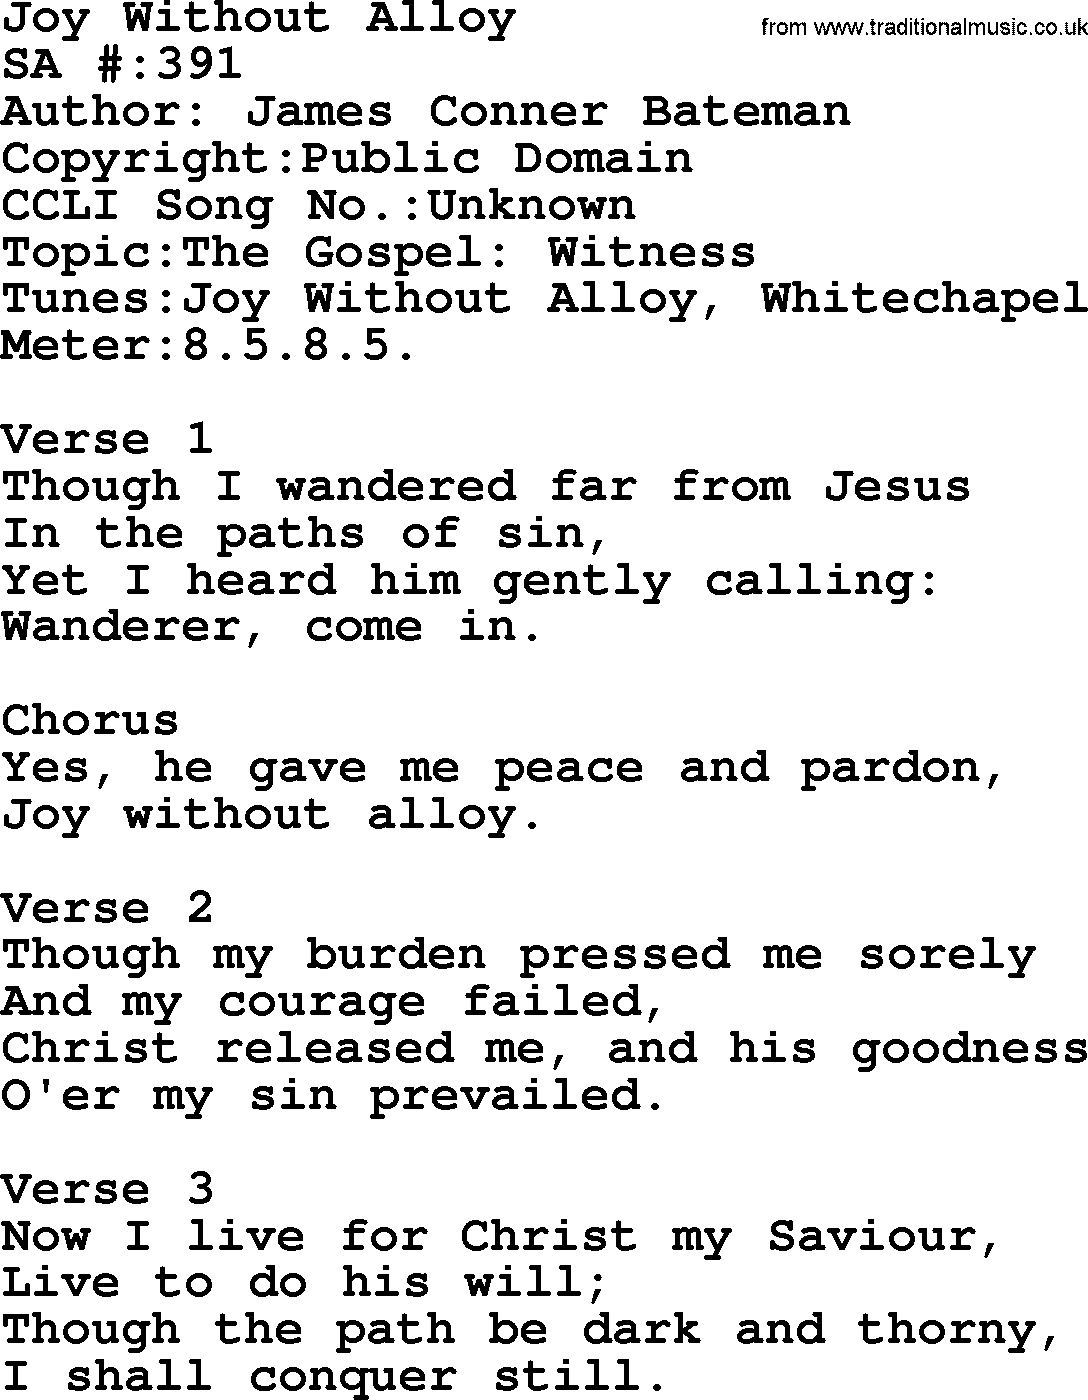 Salvation Army Hymnal, title: Joy Without Alloy, with lyrics and PDF,